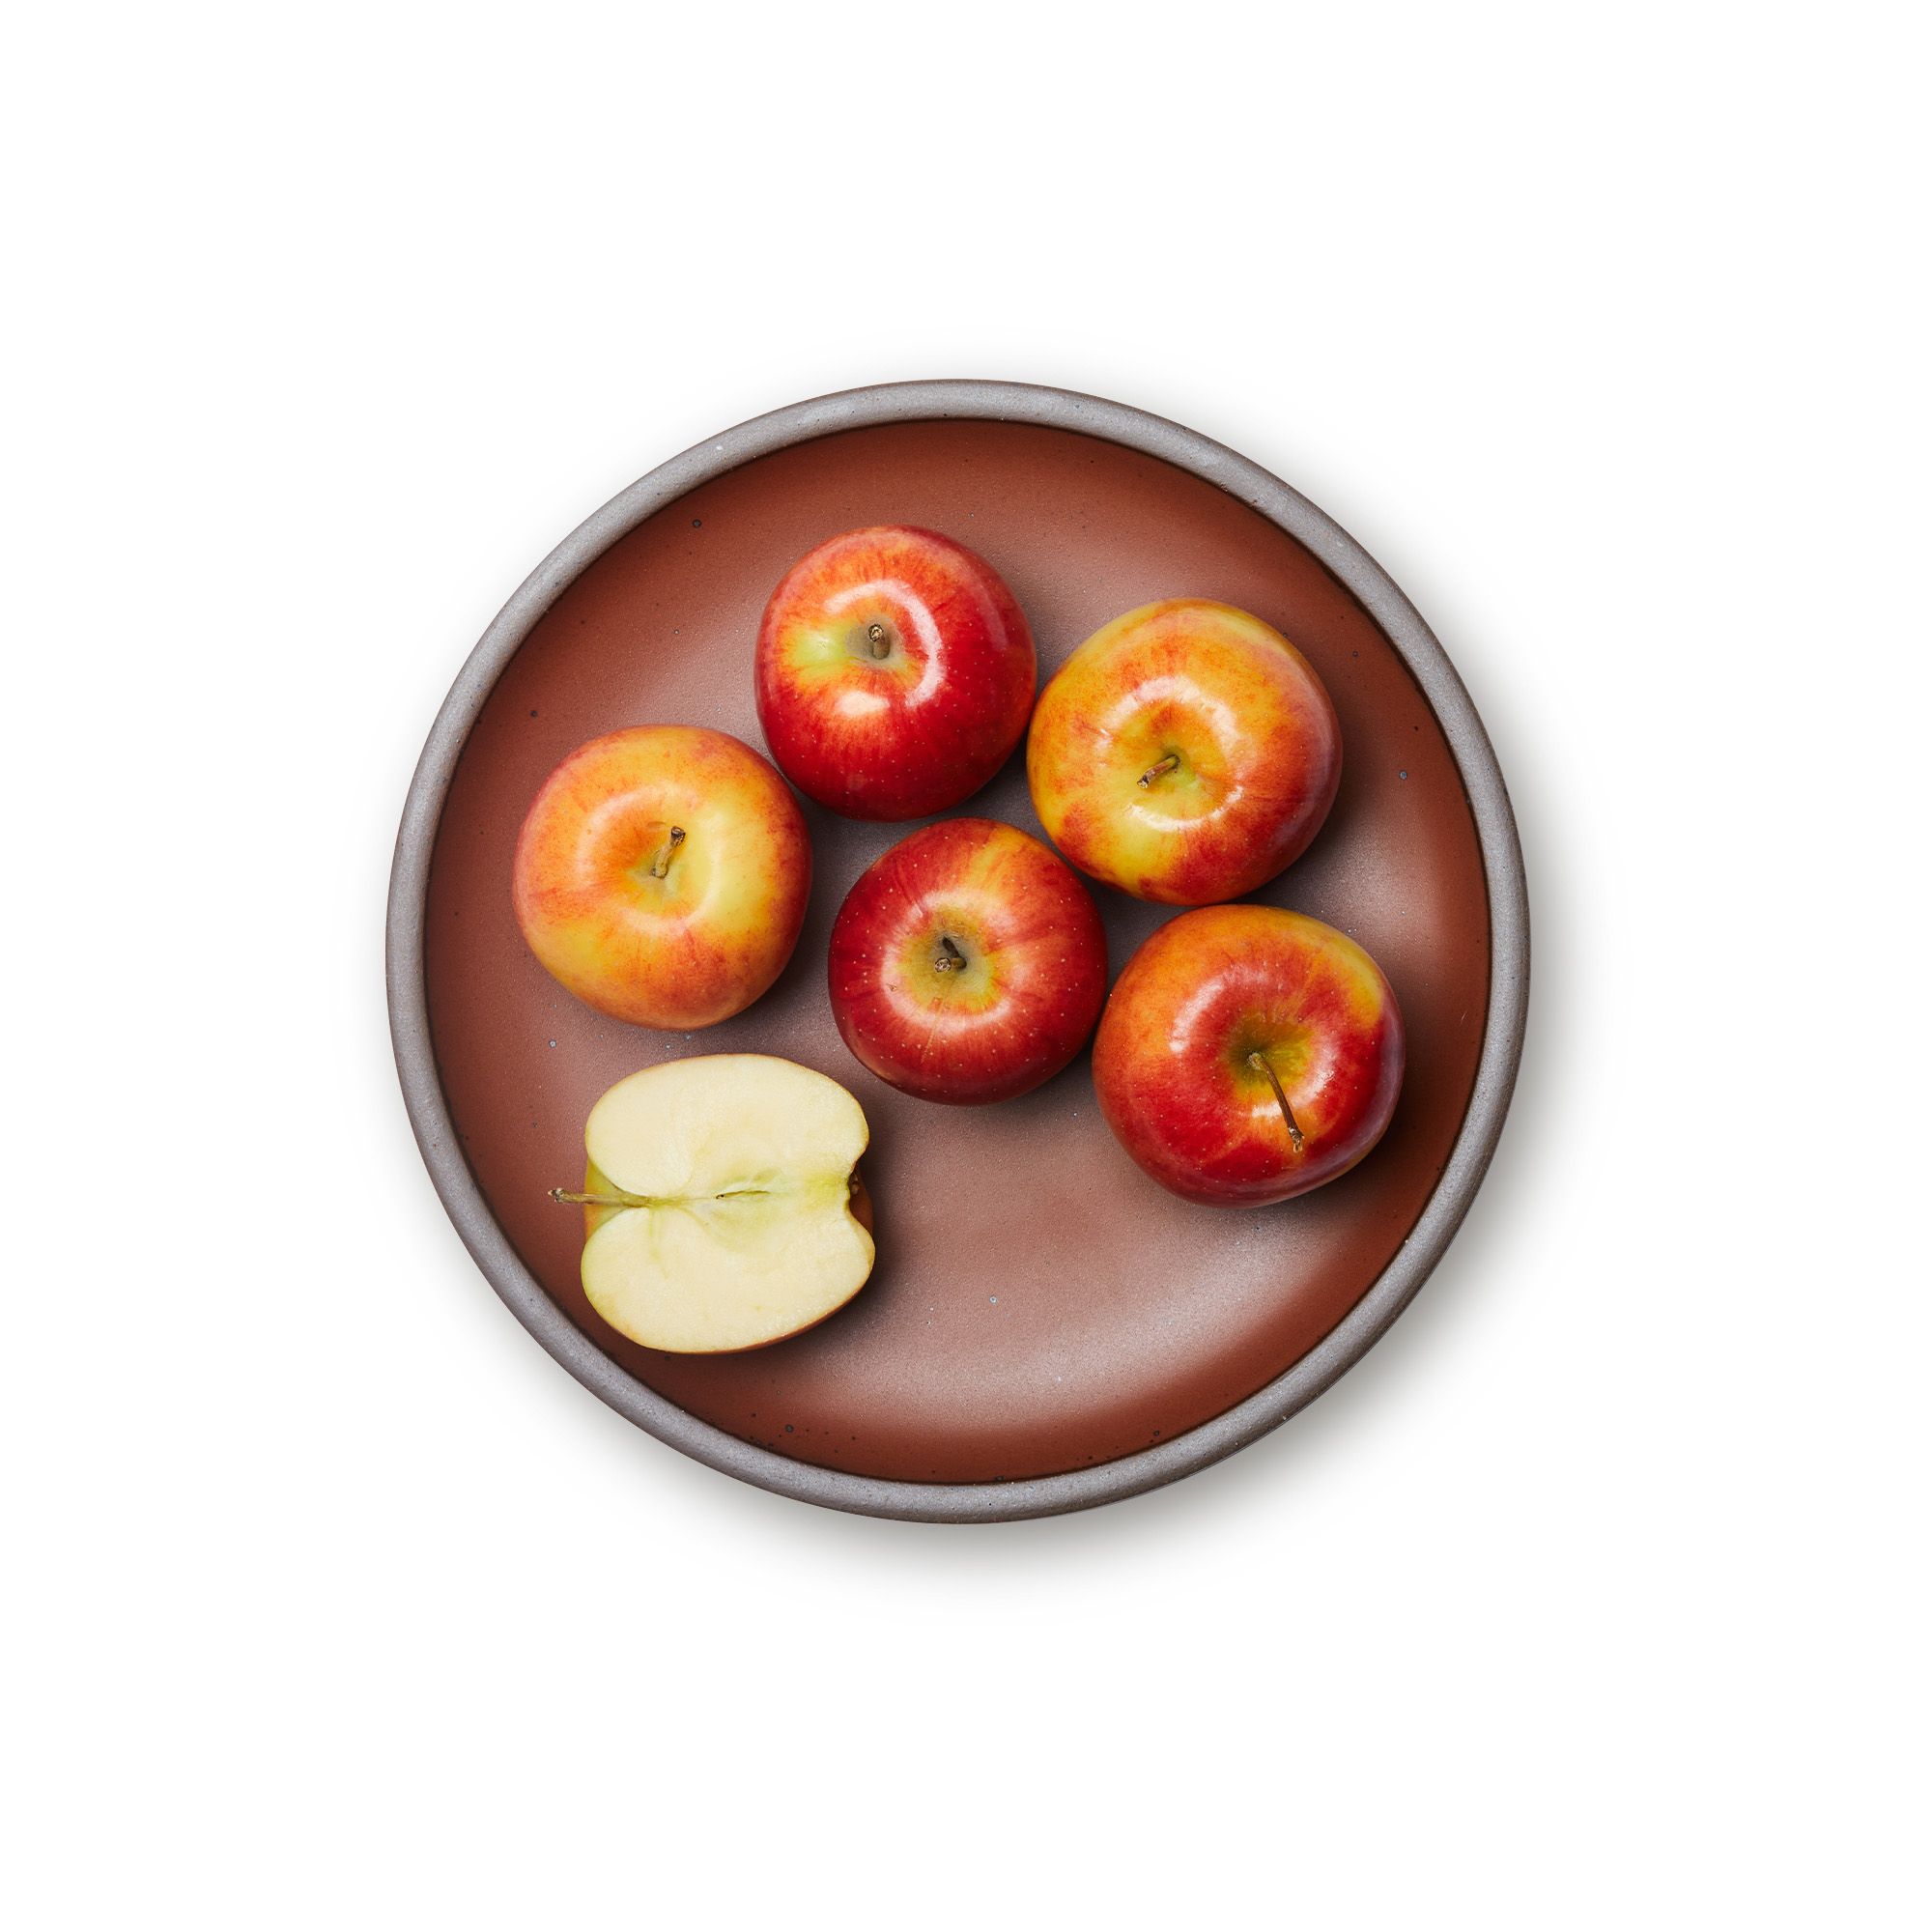 Apples on a dinner sized ceramic plate in a cool burnt terracotta color featuring iron speckles and an unglazed rim